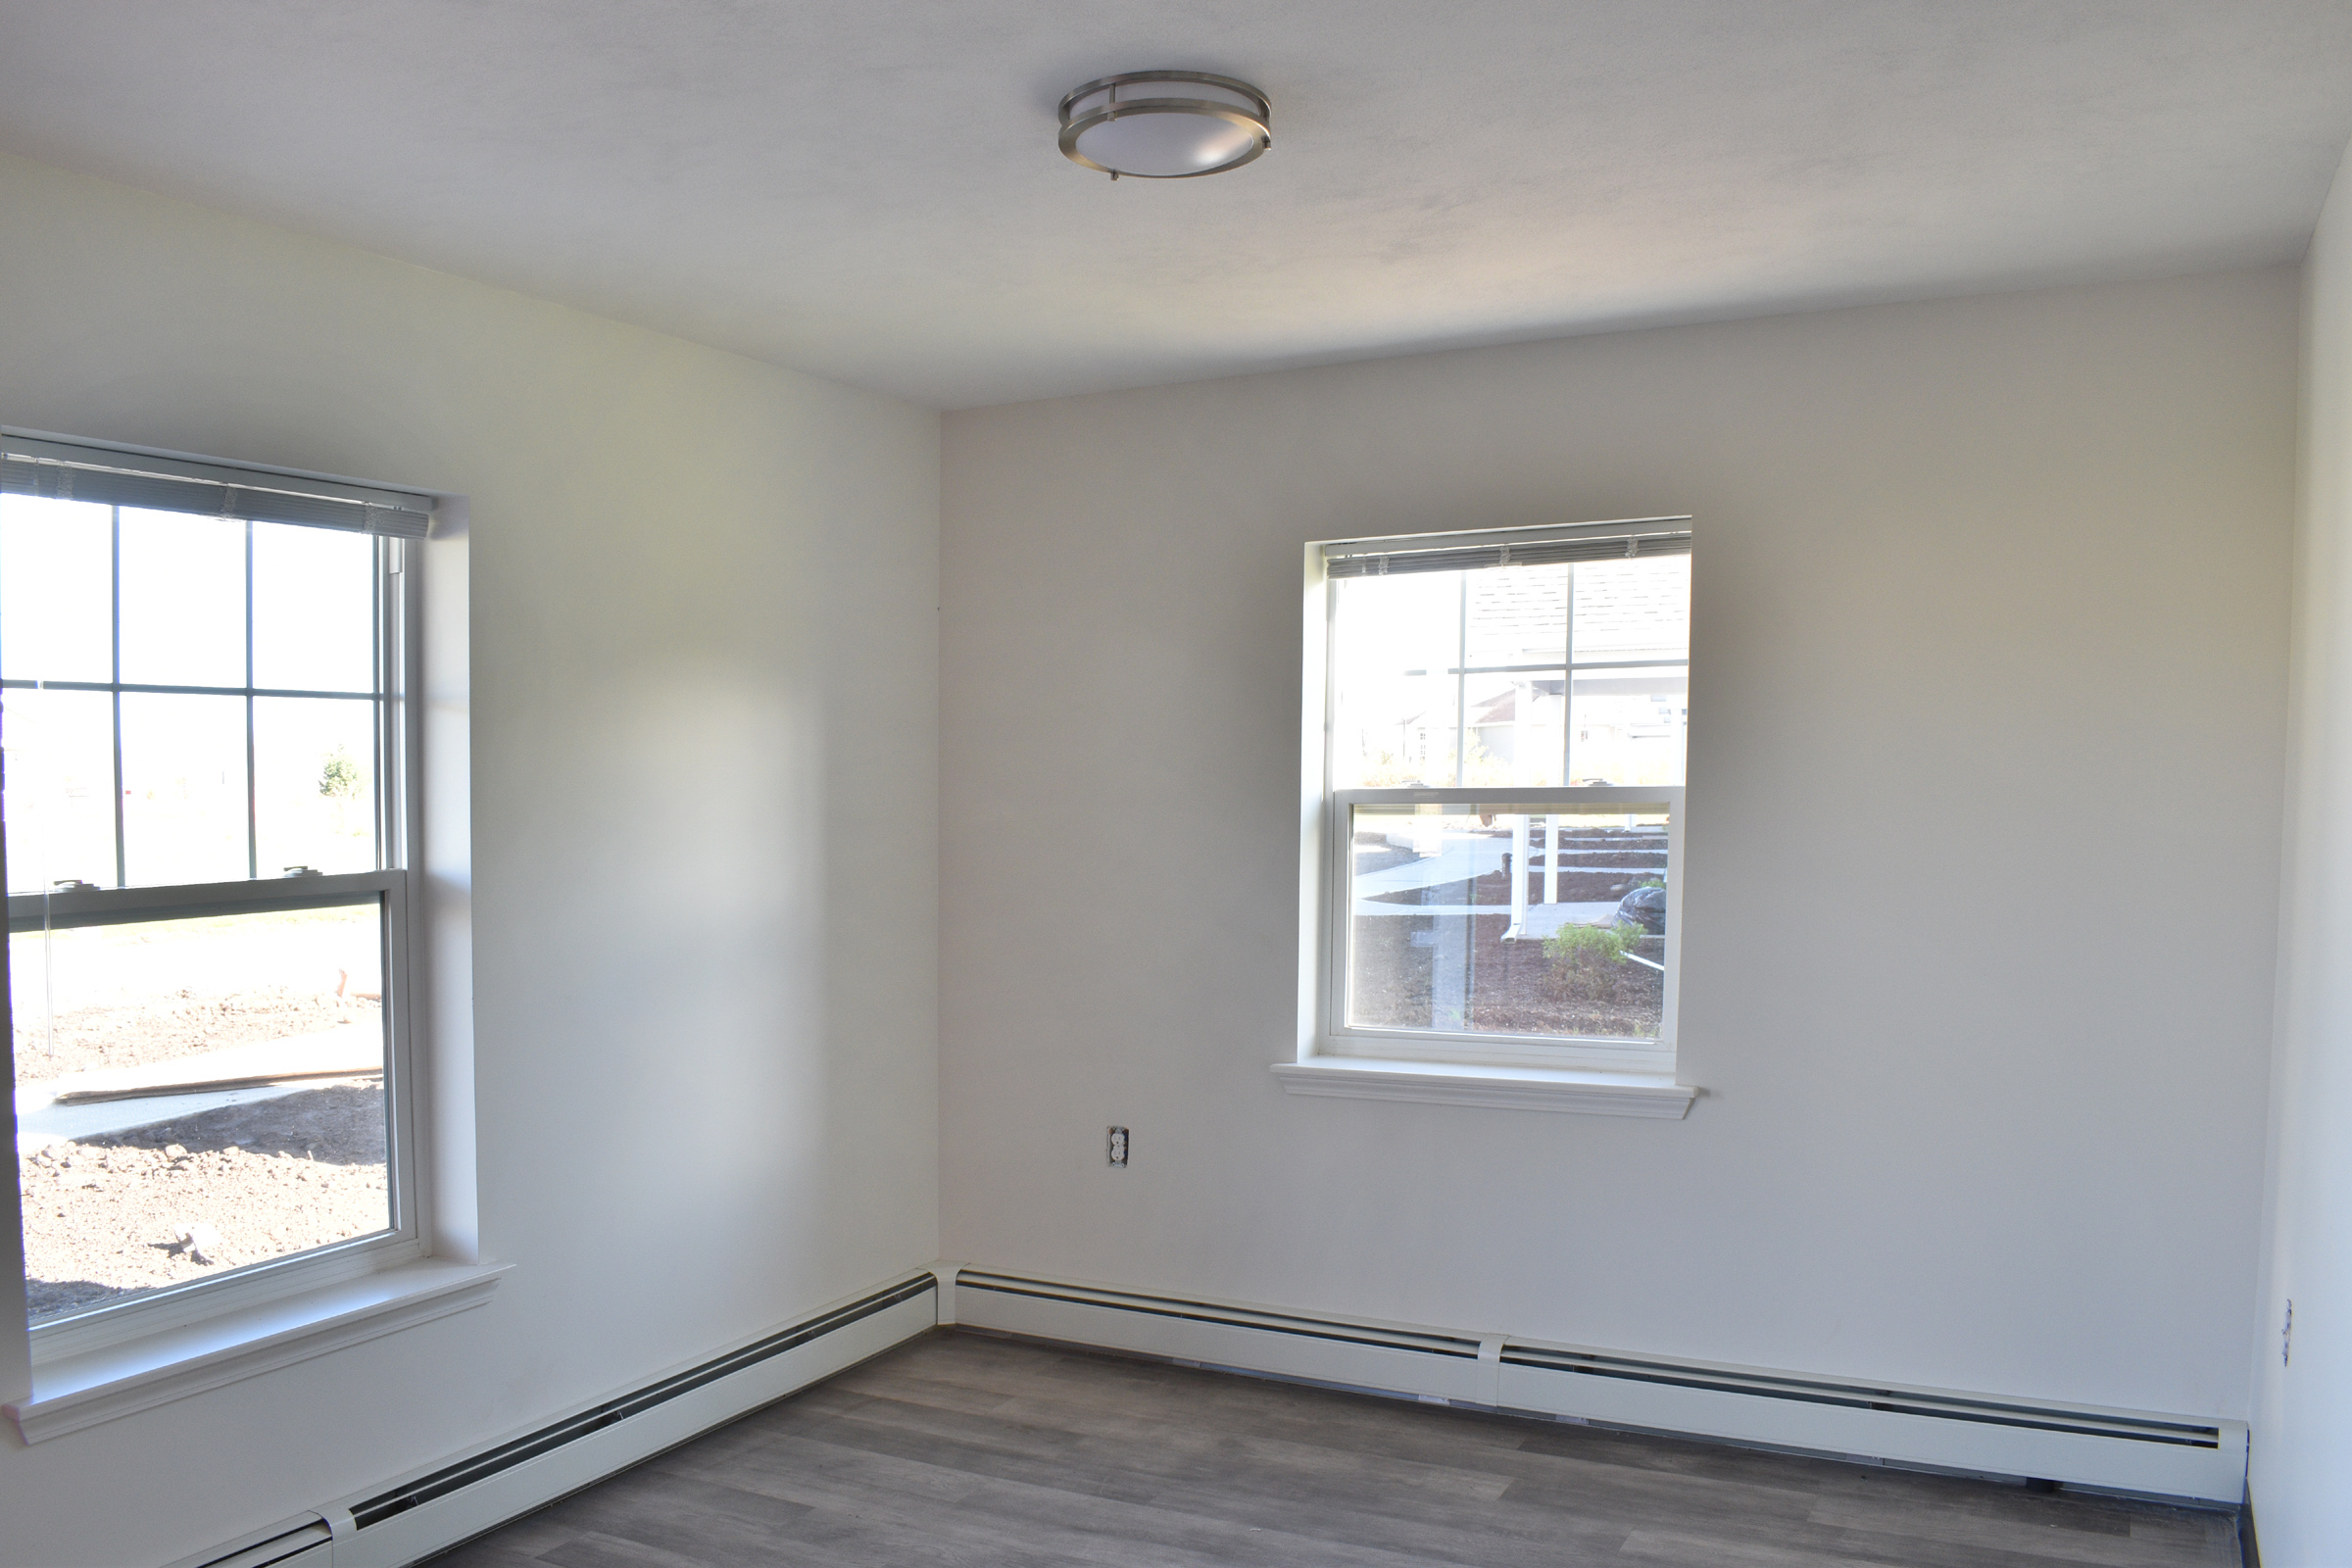 property management company client list syracuse ny one floor bedroom view image of island hollow Phase II